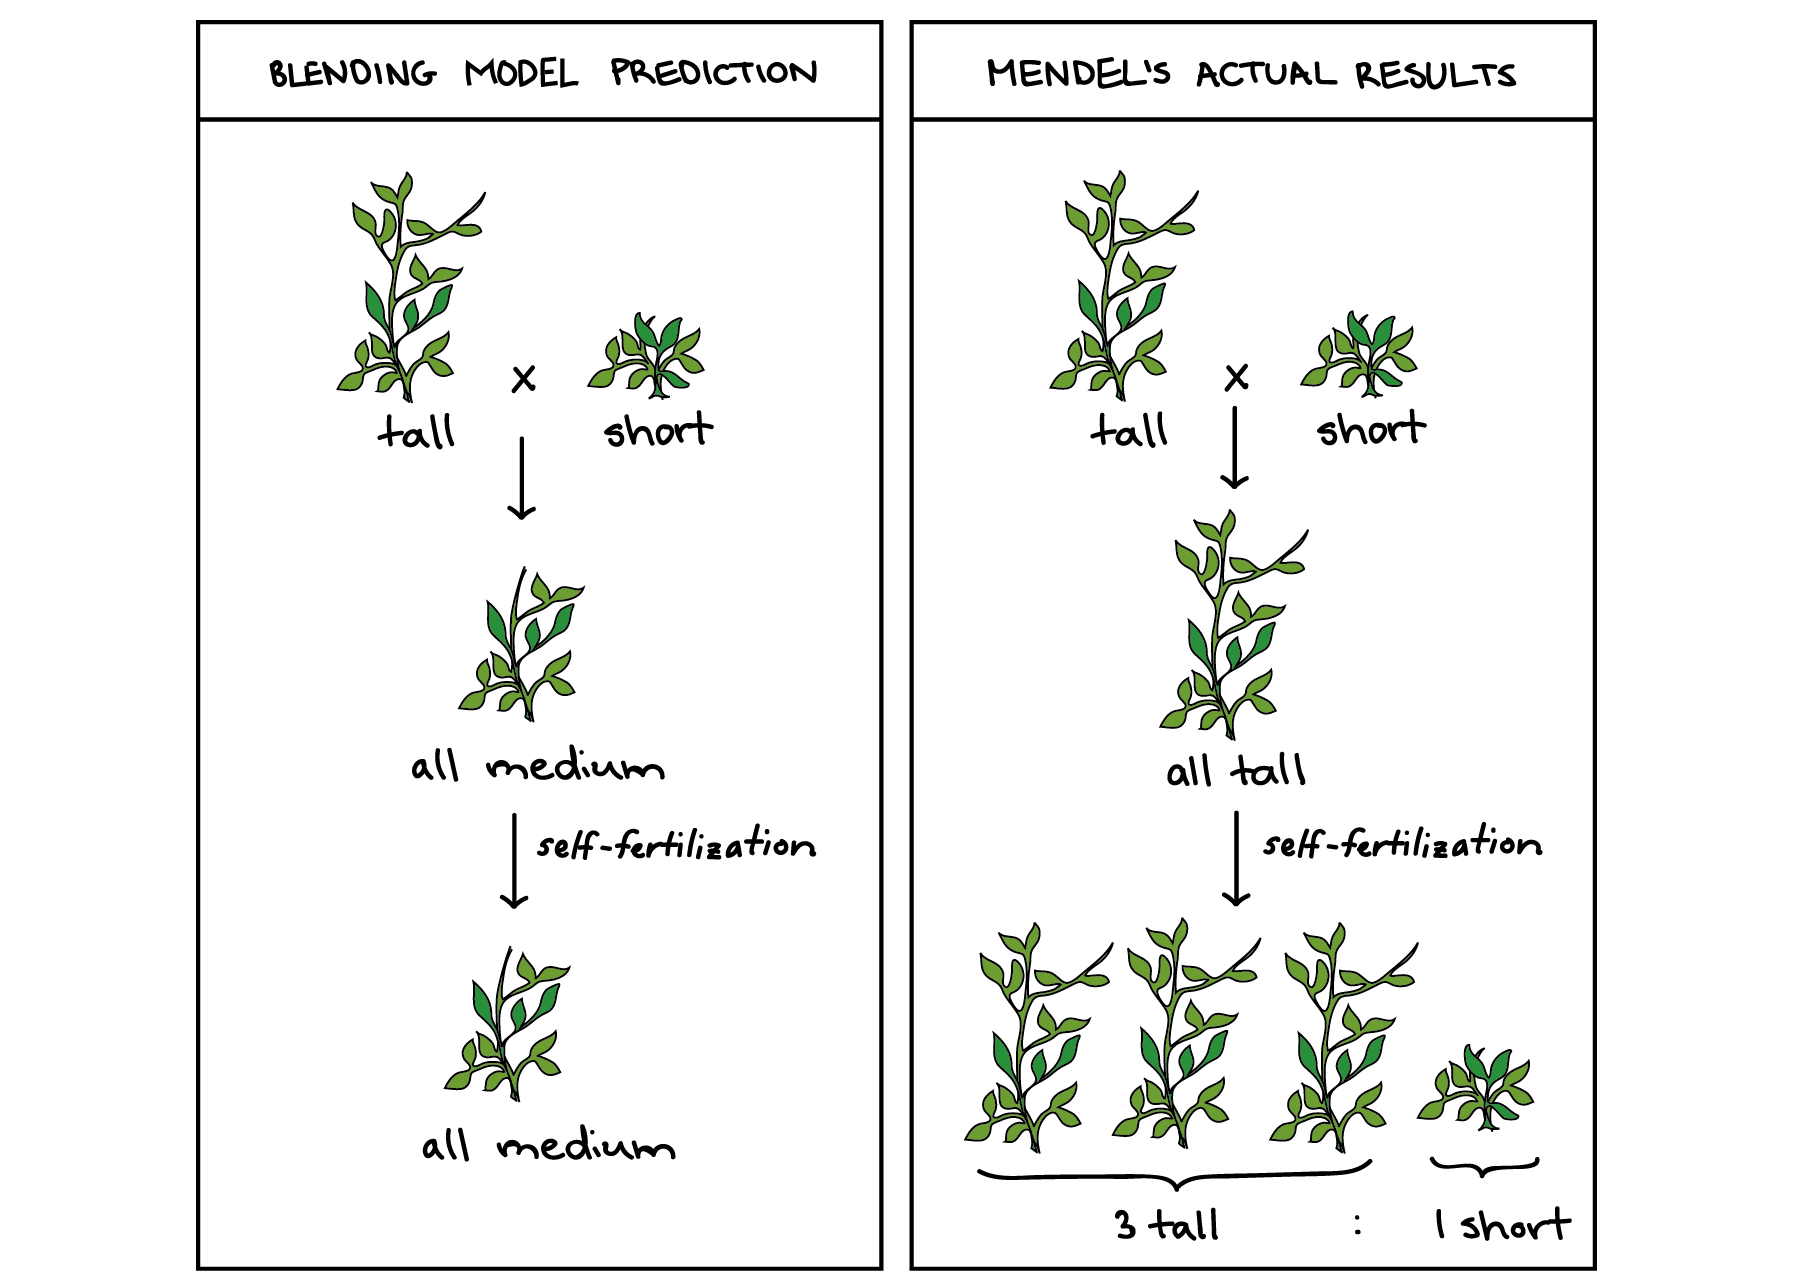 Image comparing the predictions of the blending model with Mendel's actual results for a cross between a tall pea plant and a short pea plant. The blending model predicts that all the offspring from the cross should be of medium height, and that if those offspring self-fertilize, all the plants in the next generation will also be of medium height. Mendel instead observed that all the offspring of the cross were tall, and that when they self-fertilized, they produced tall and short plants in a ratio of 3:1.